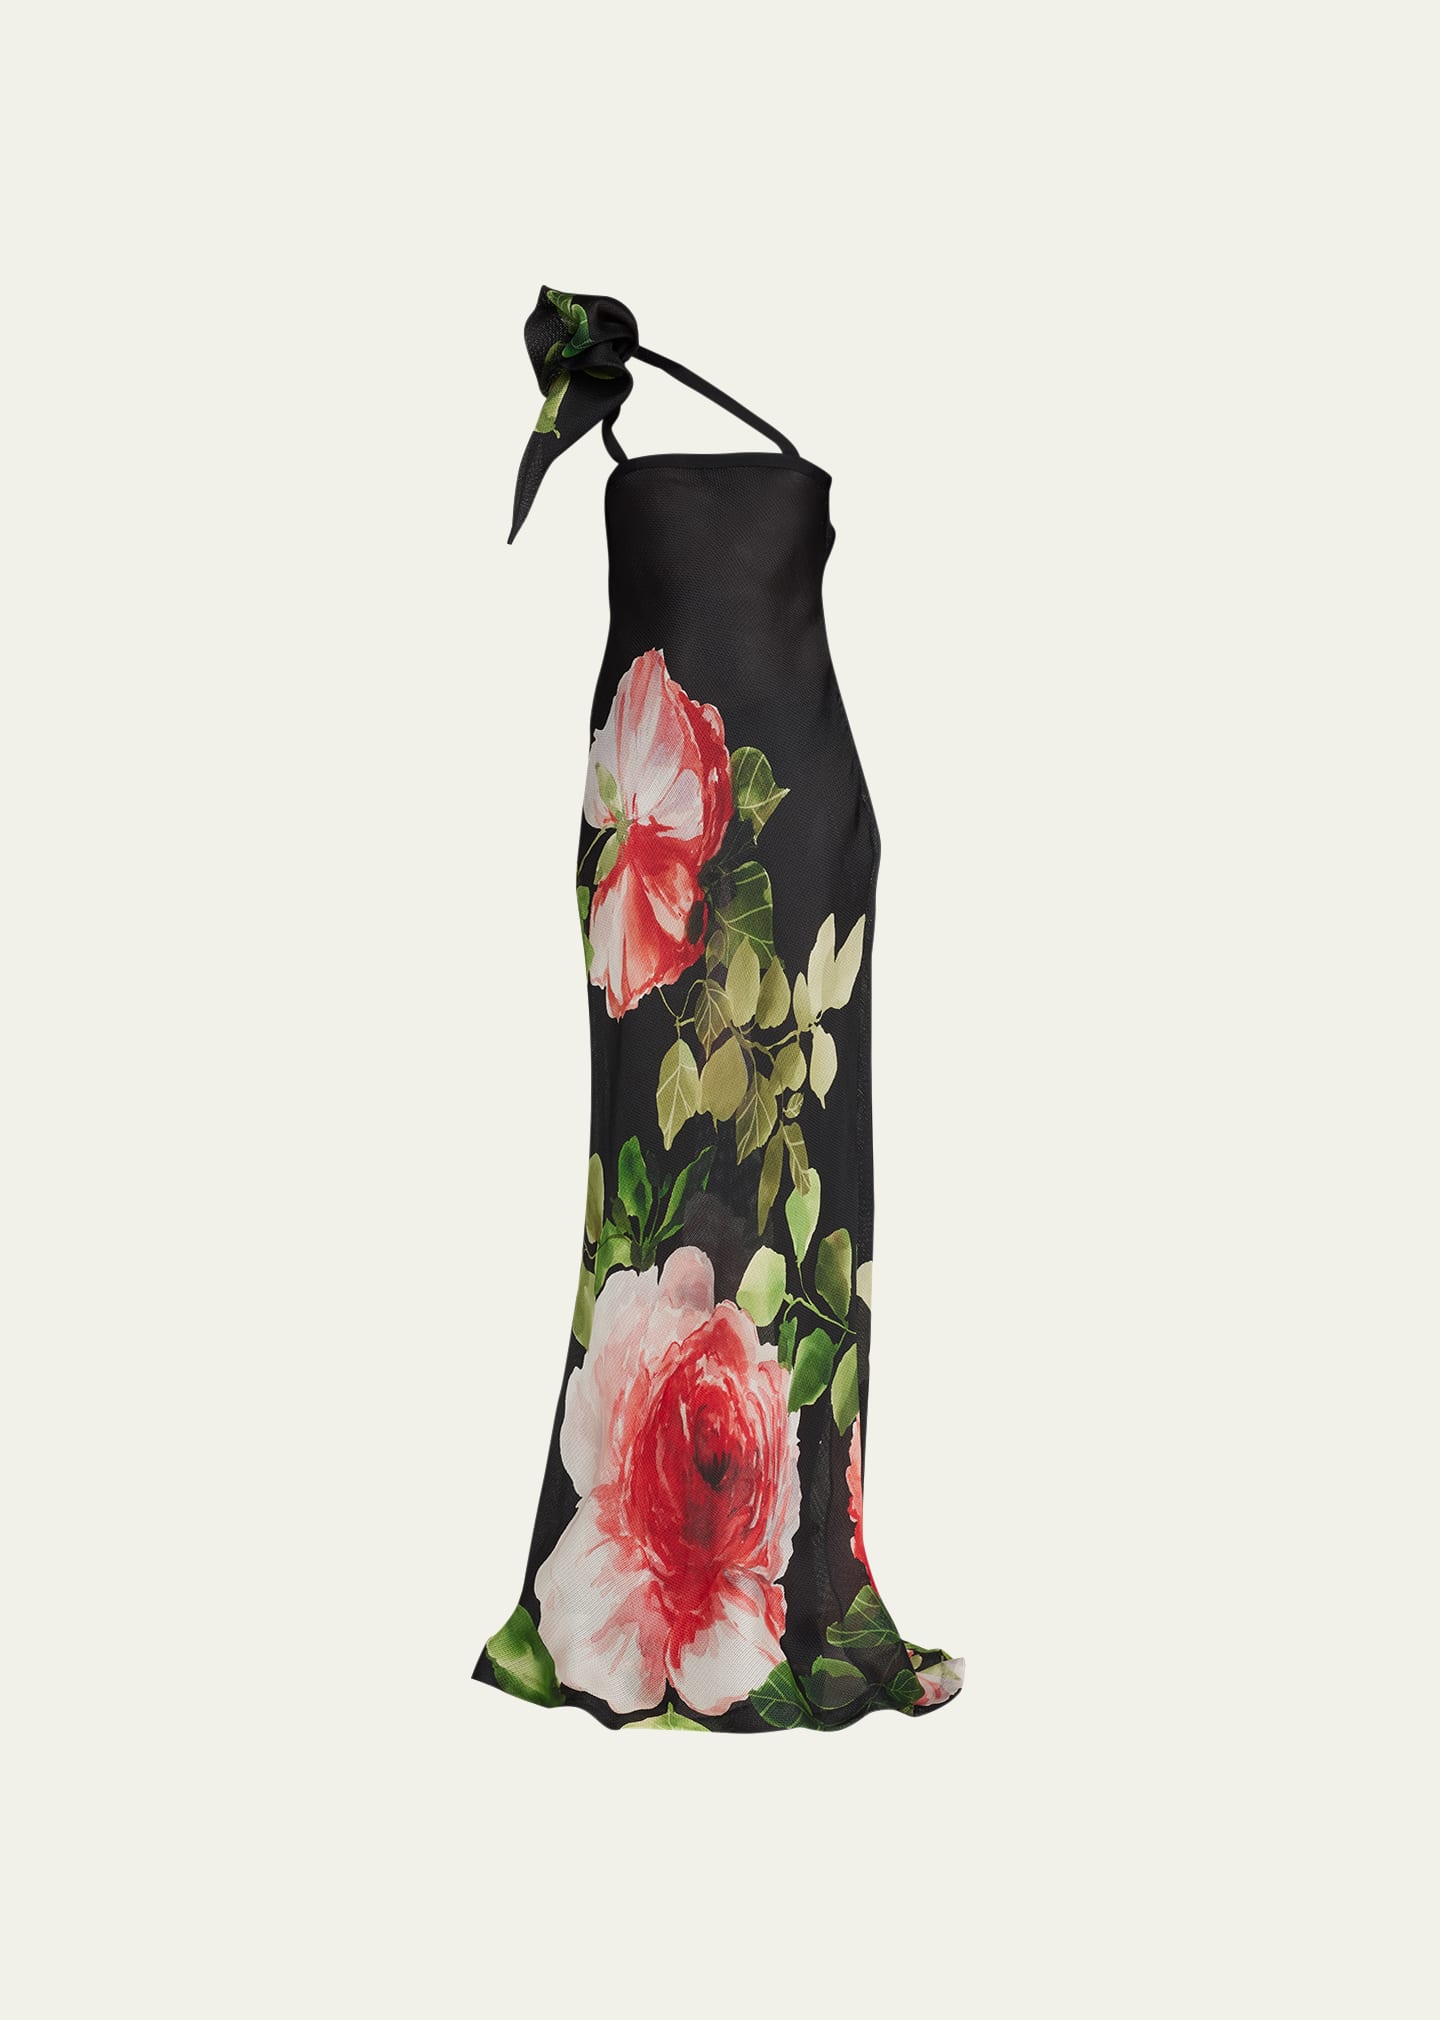 Printed Floral Gown w/ Bow Detail